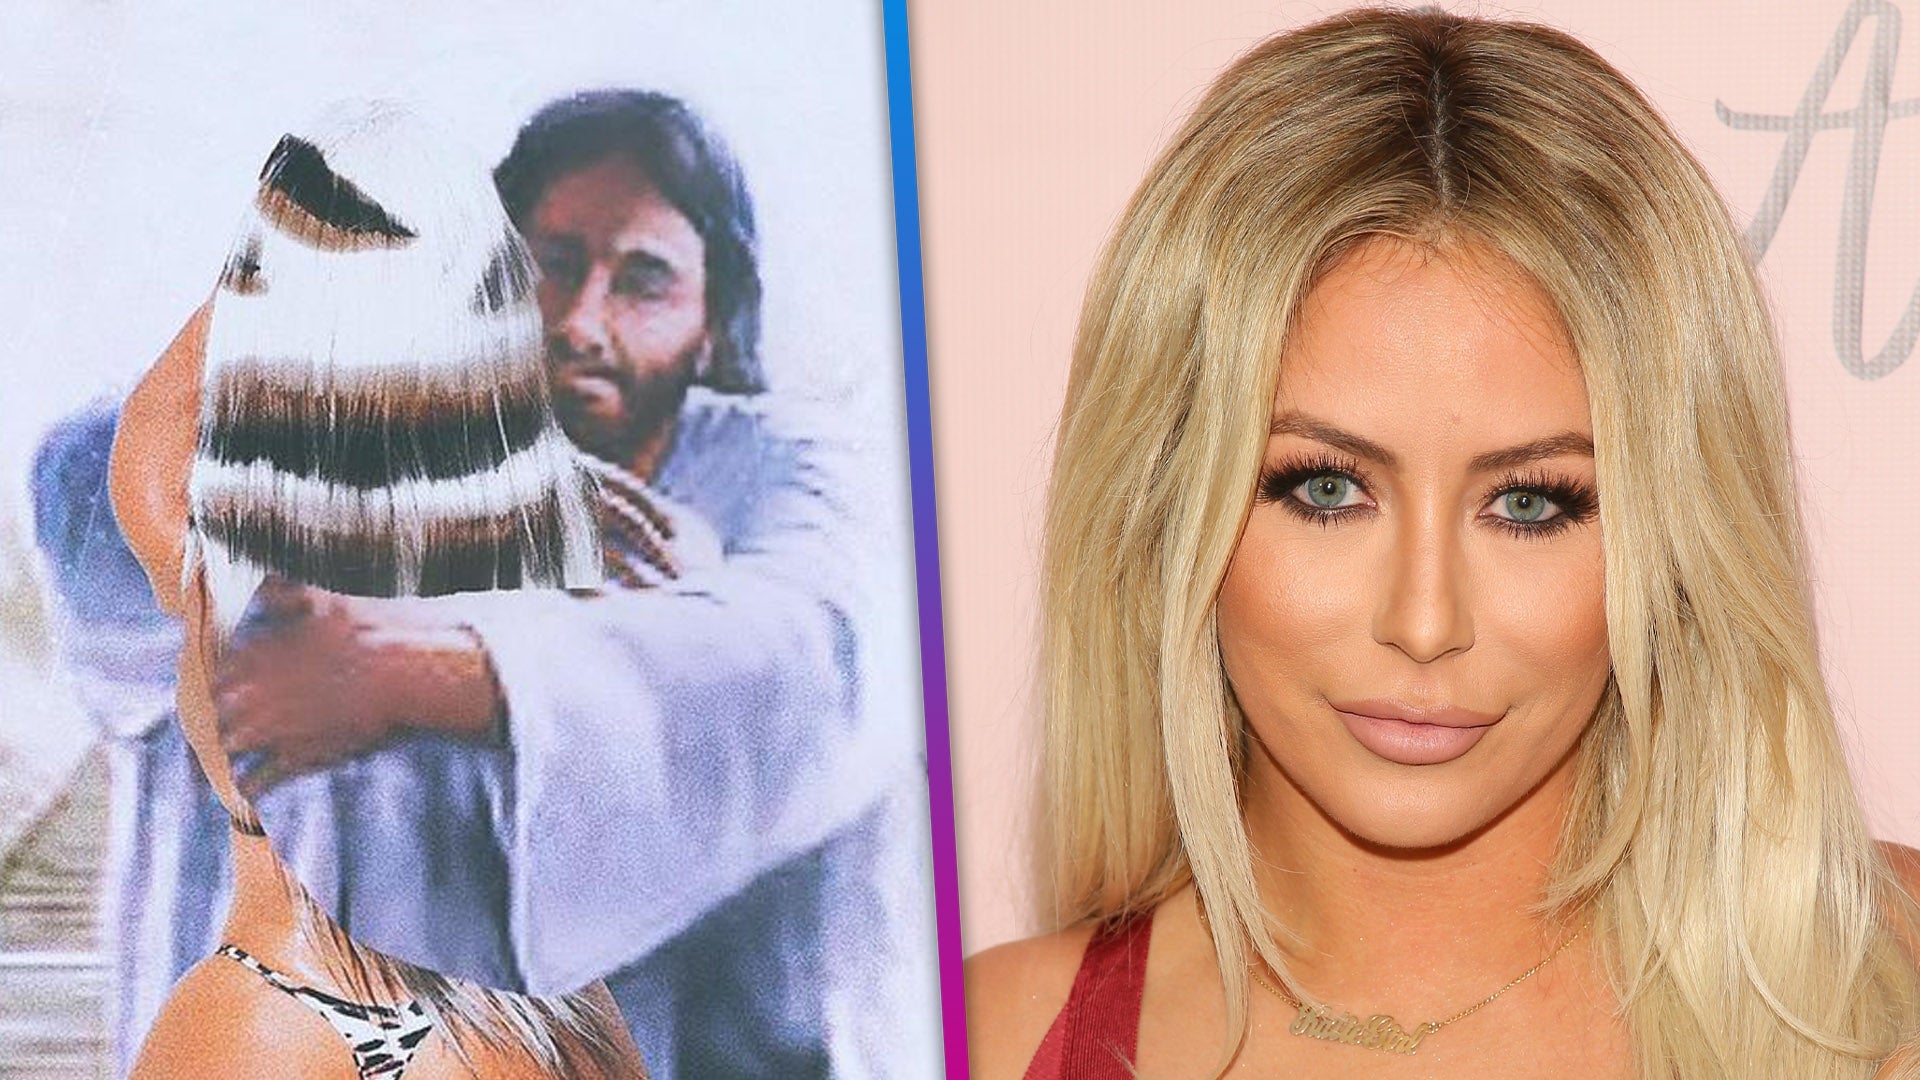 Aubrey O'Day Photoshops Herself With Jesus as Clapback to Social Media Criticism